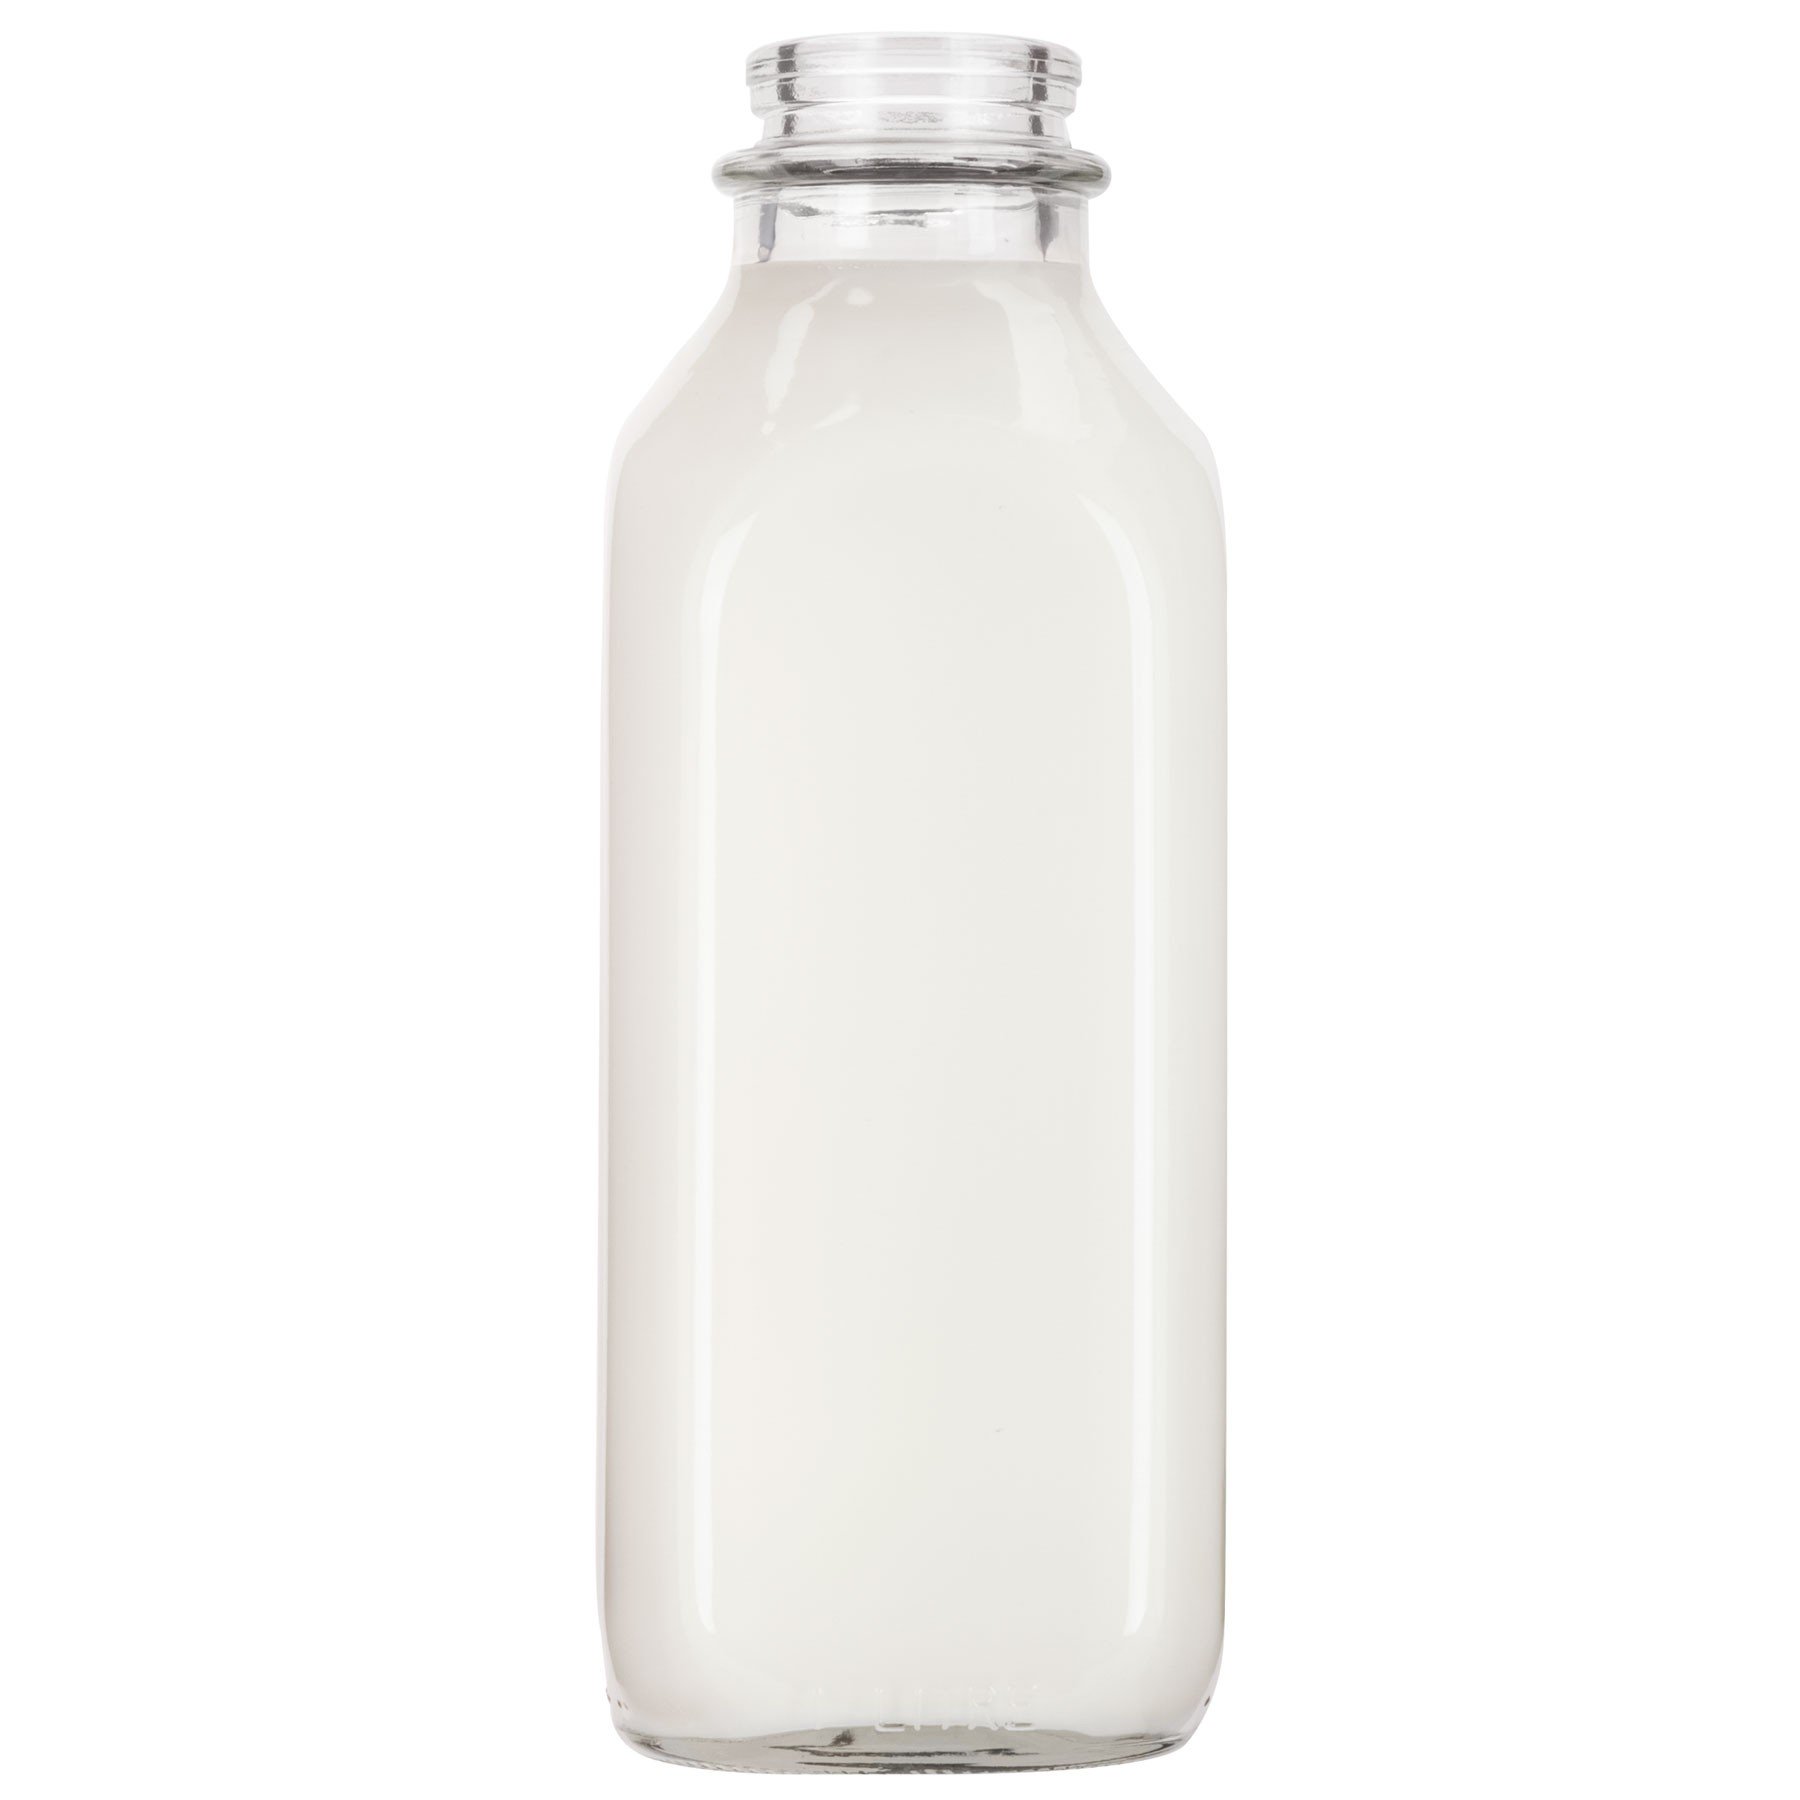 34 oz. Liter Clear Glass Milk Bottle - The Cary Company